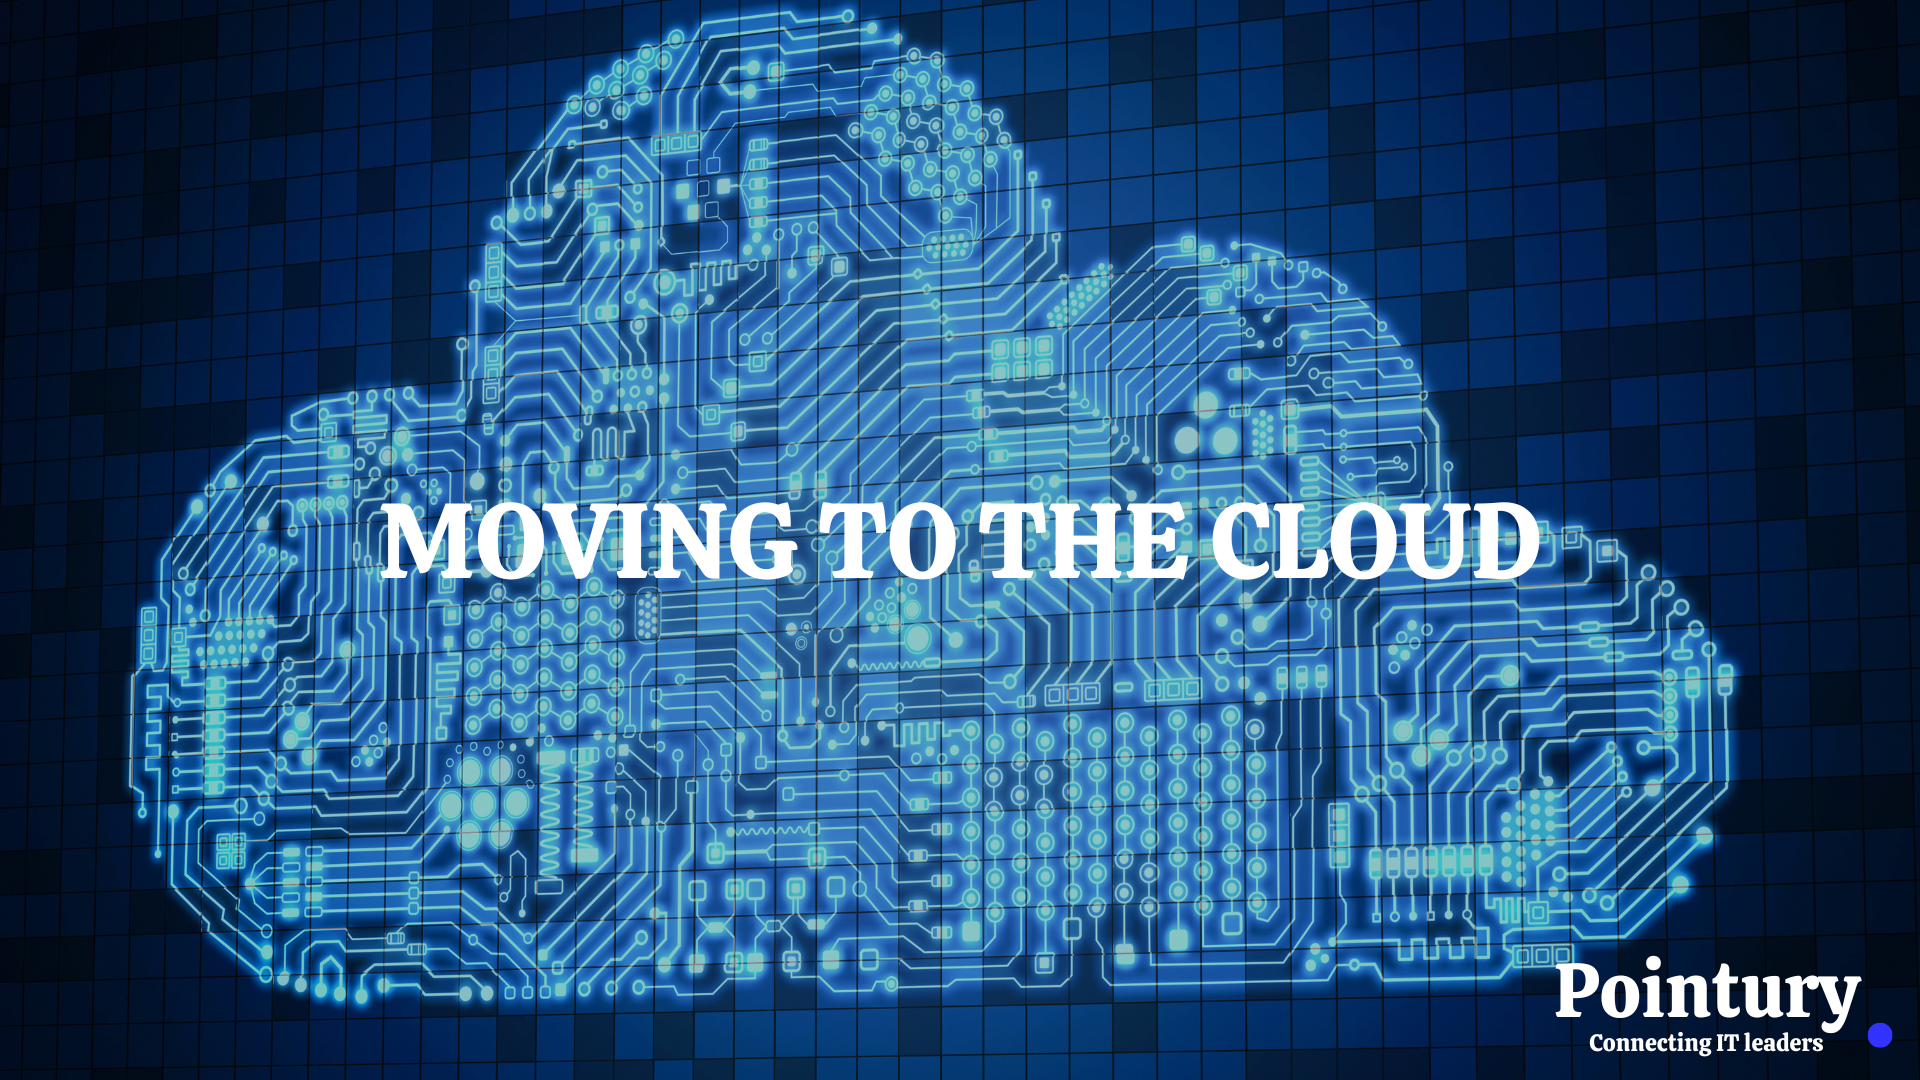 MOVING TO THE CLOUD